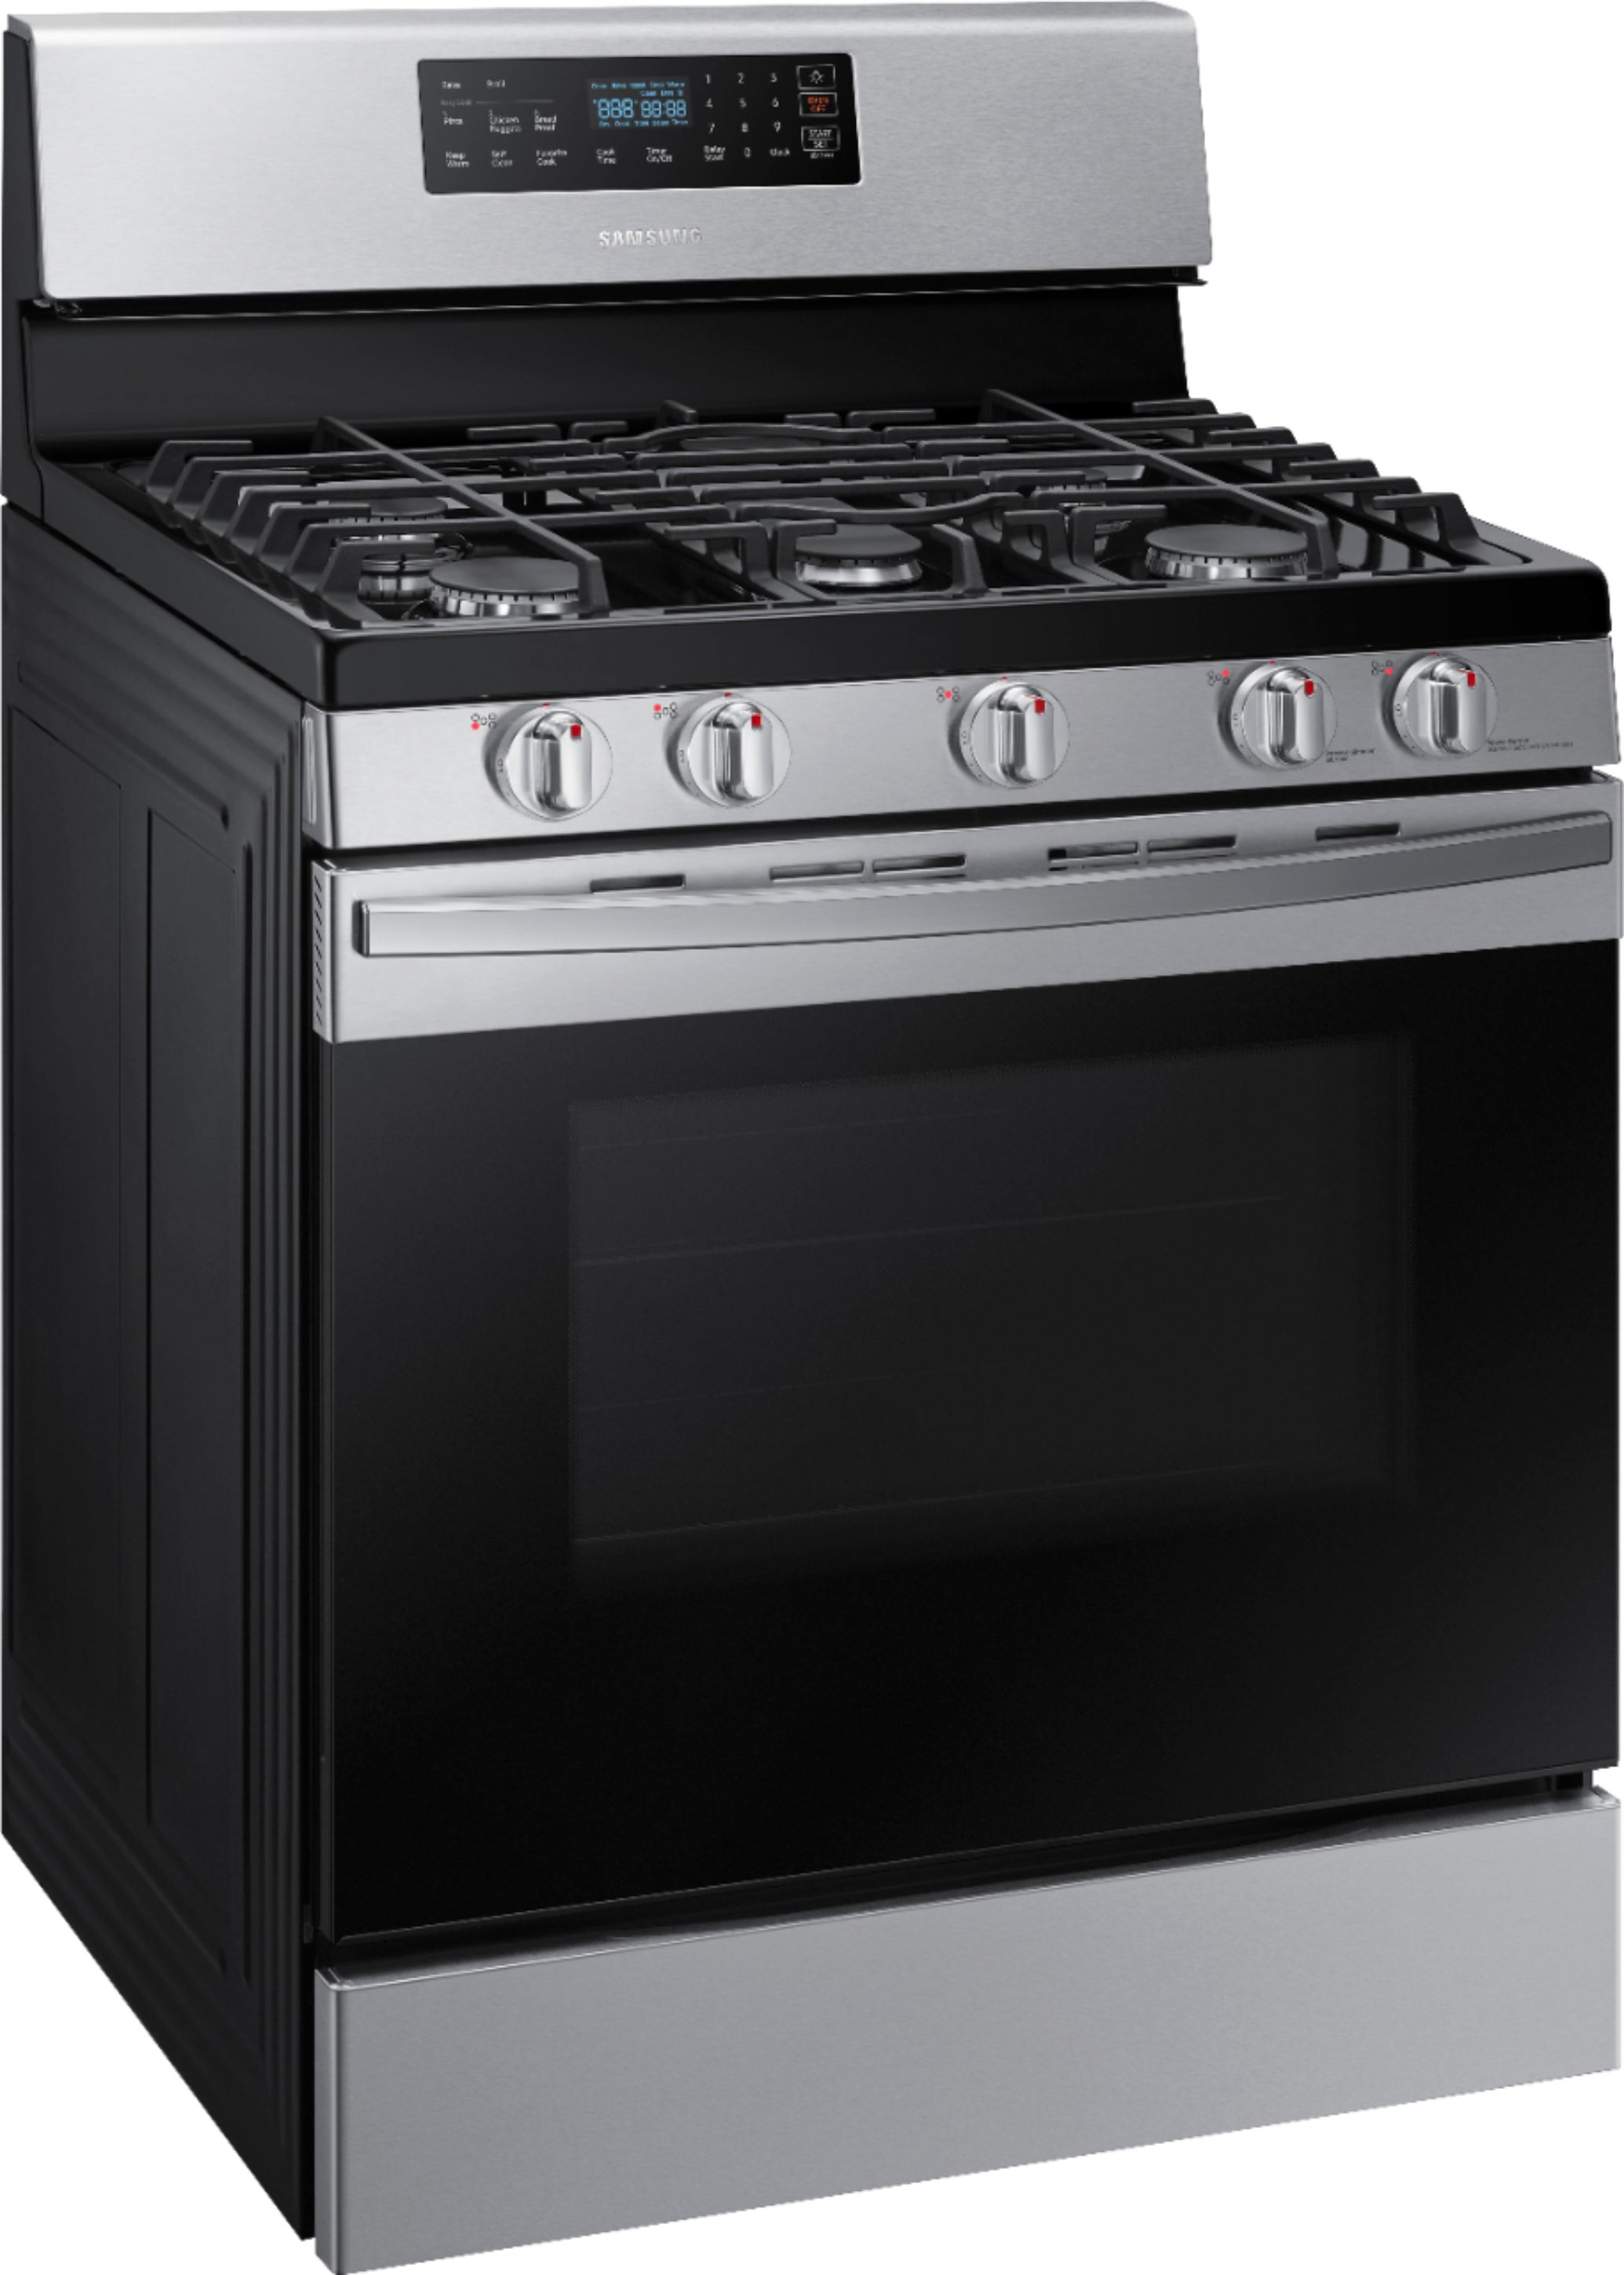 Angle View: Fulgor Milano - 4.4 Cu. Ft. Freestanding Gas Convection Range - Stainless steel